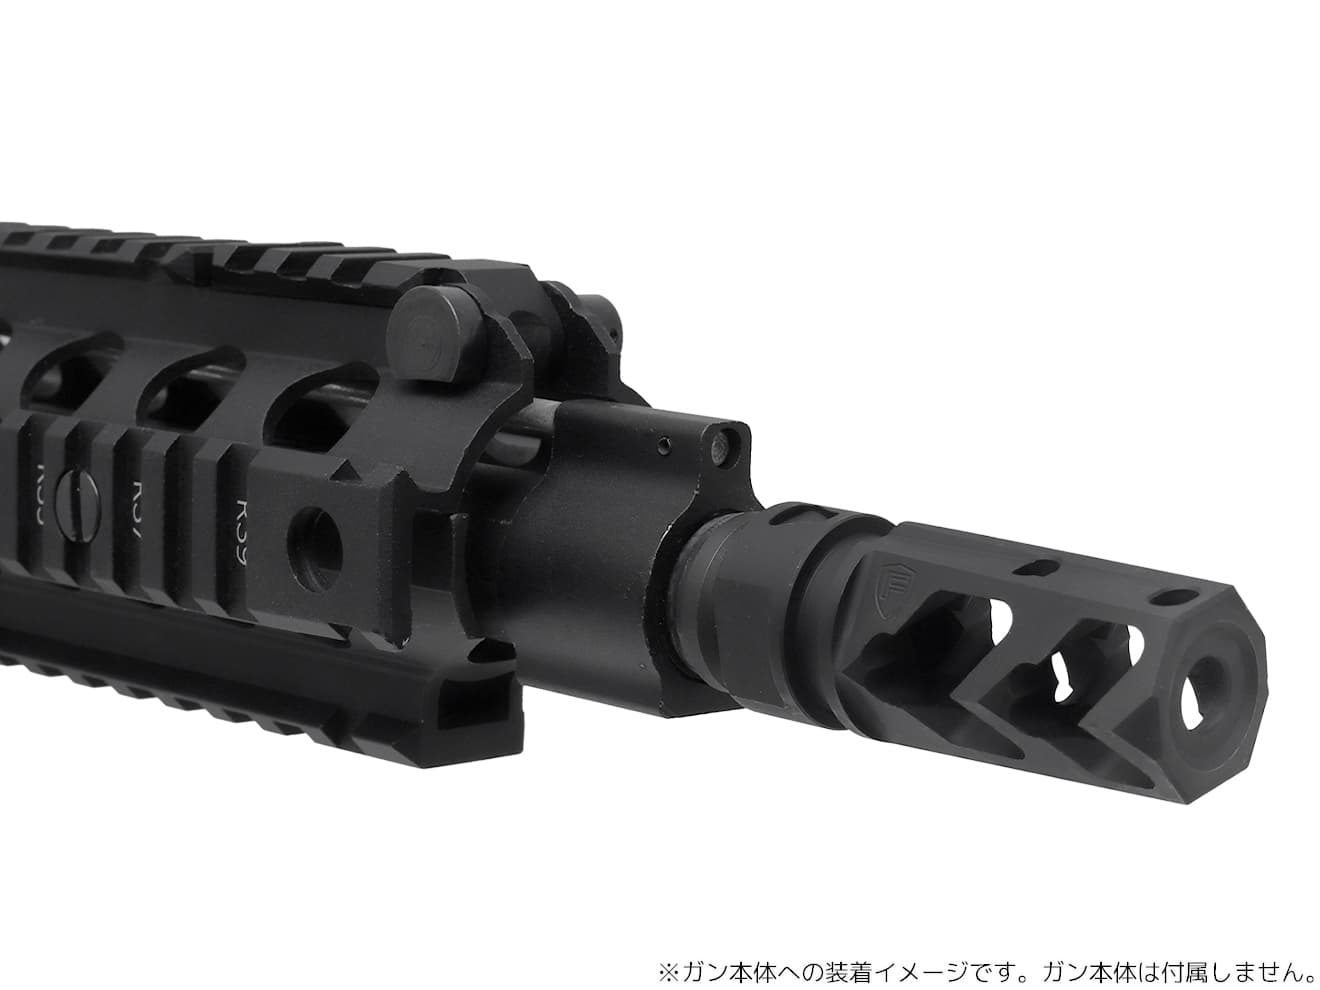 5KU Fortisタイプ マズルブレーキ 5.56 for 14mm逆ネジ